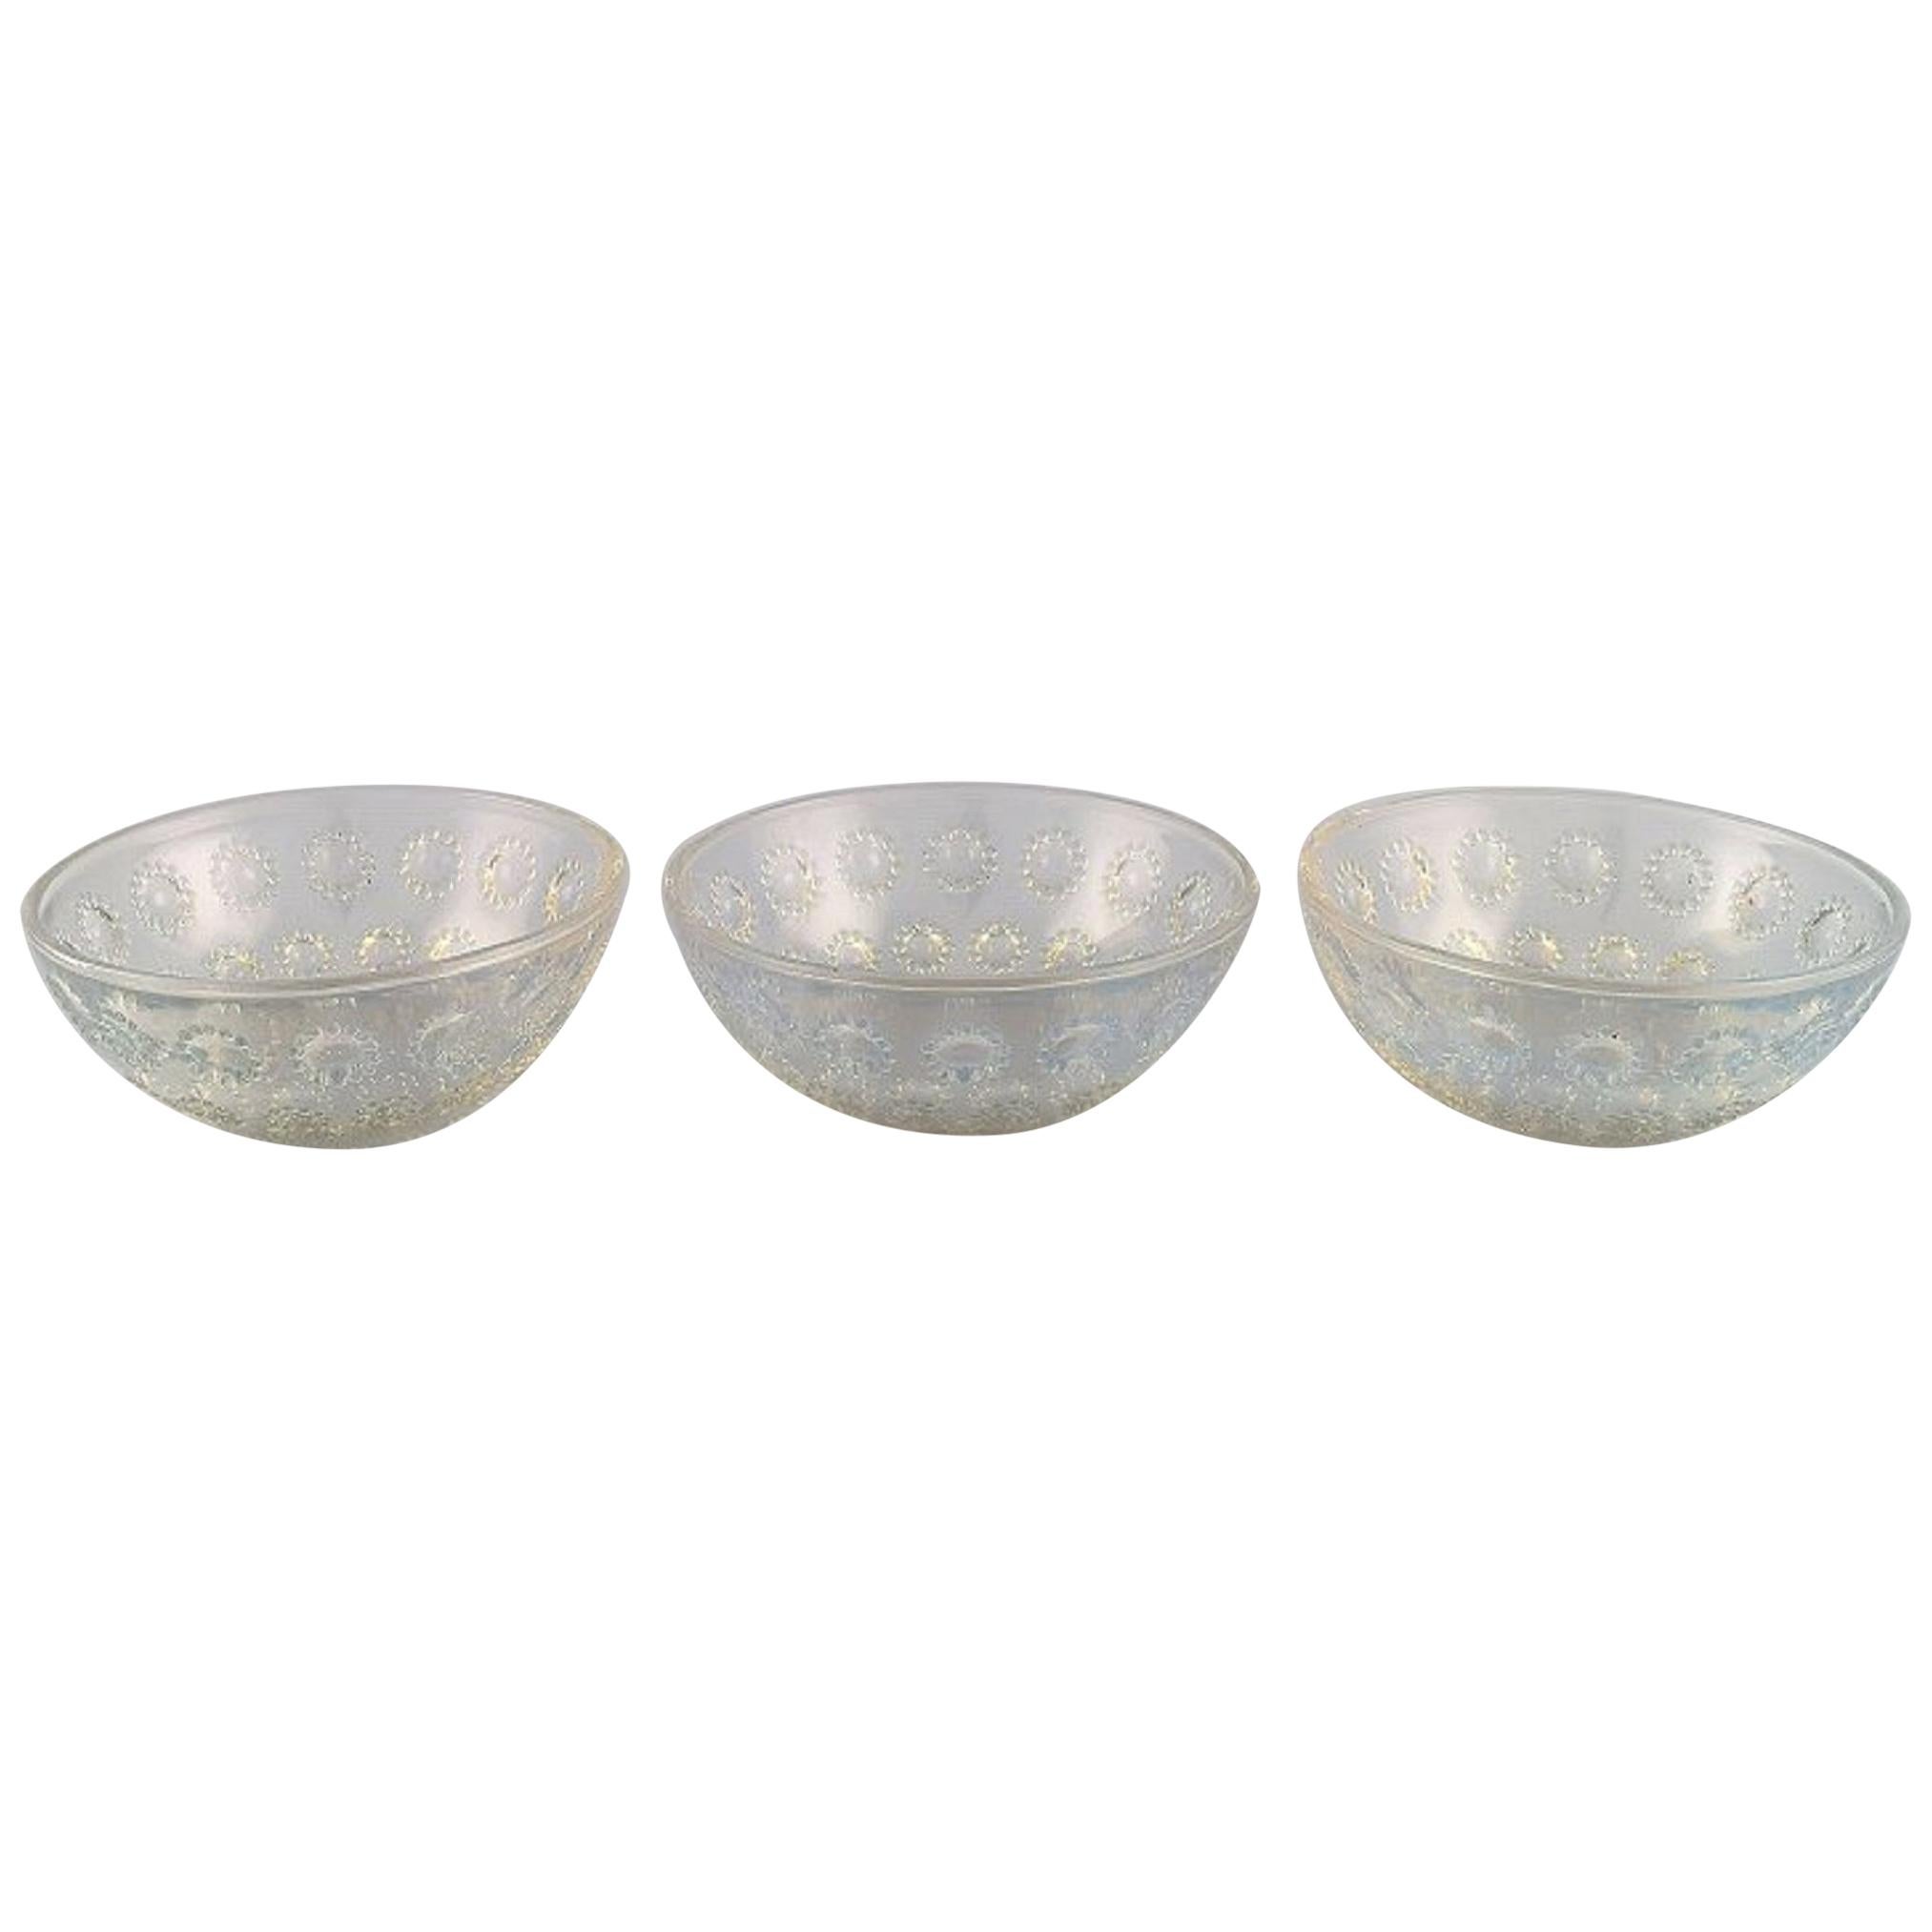 Three Early René Lalique "Asters" Bowls in Art Glass, Dated before 1945